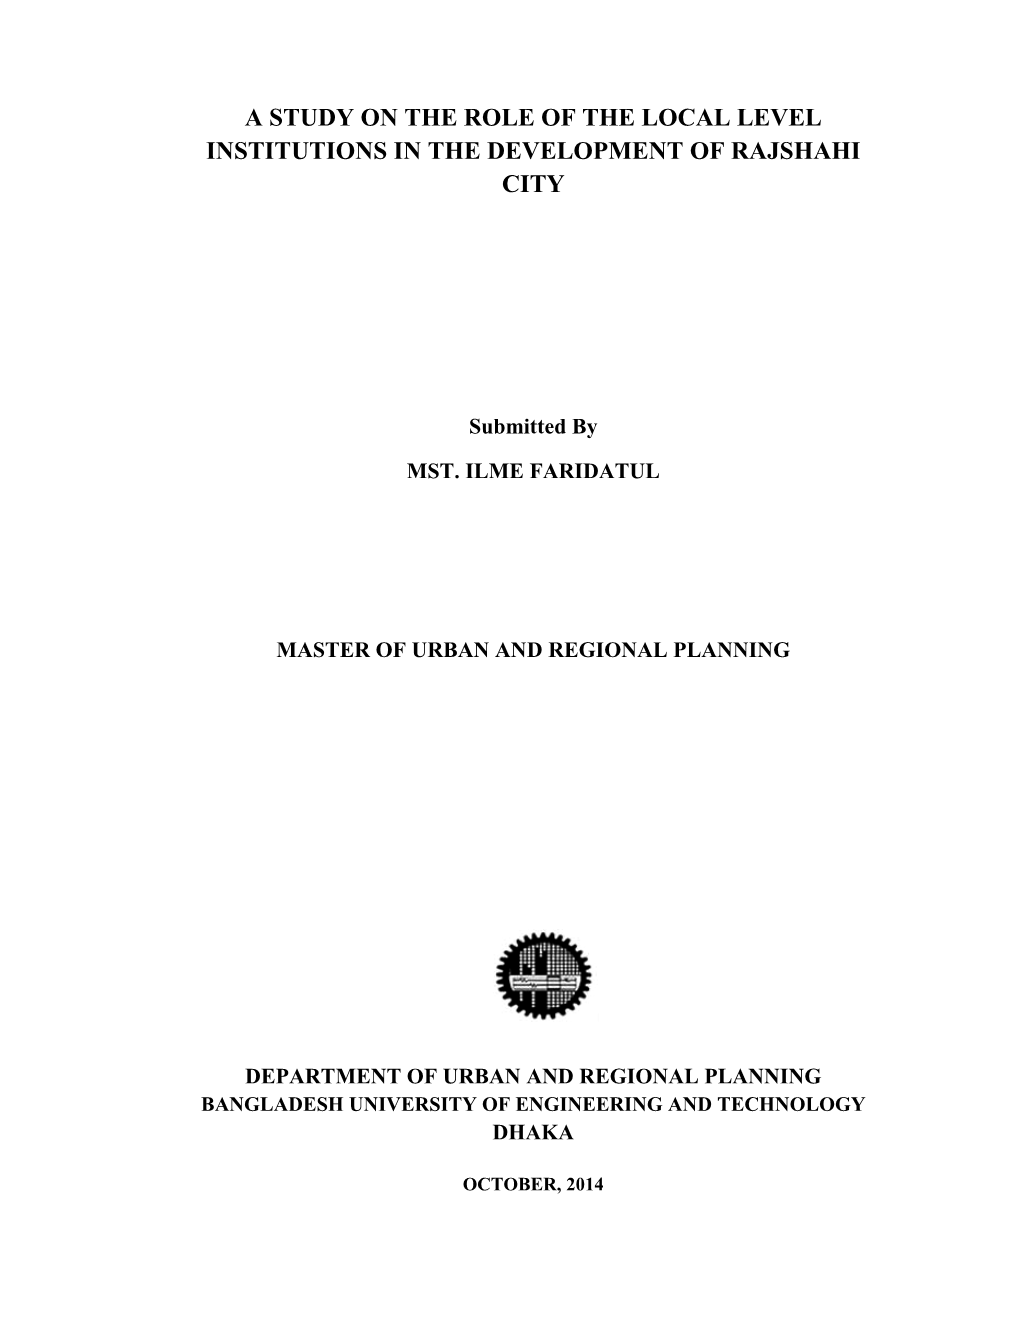 A Study on the Role of the Local Level Institutions in the Development of Rajshahi City